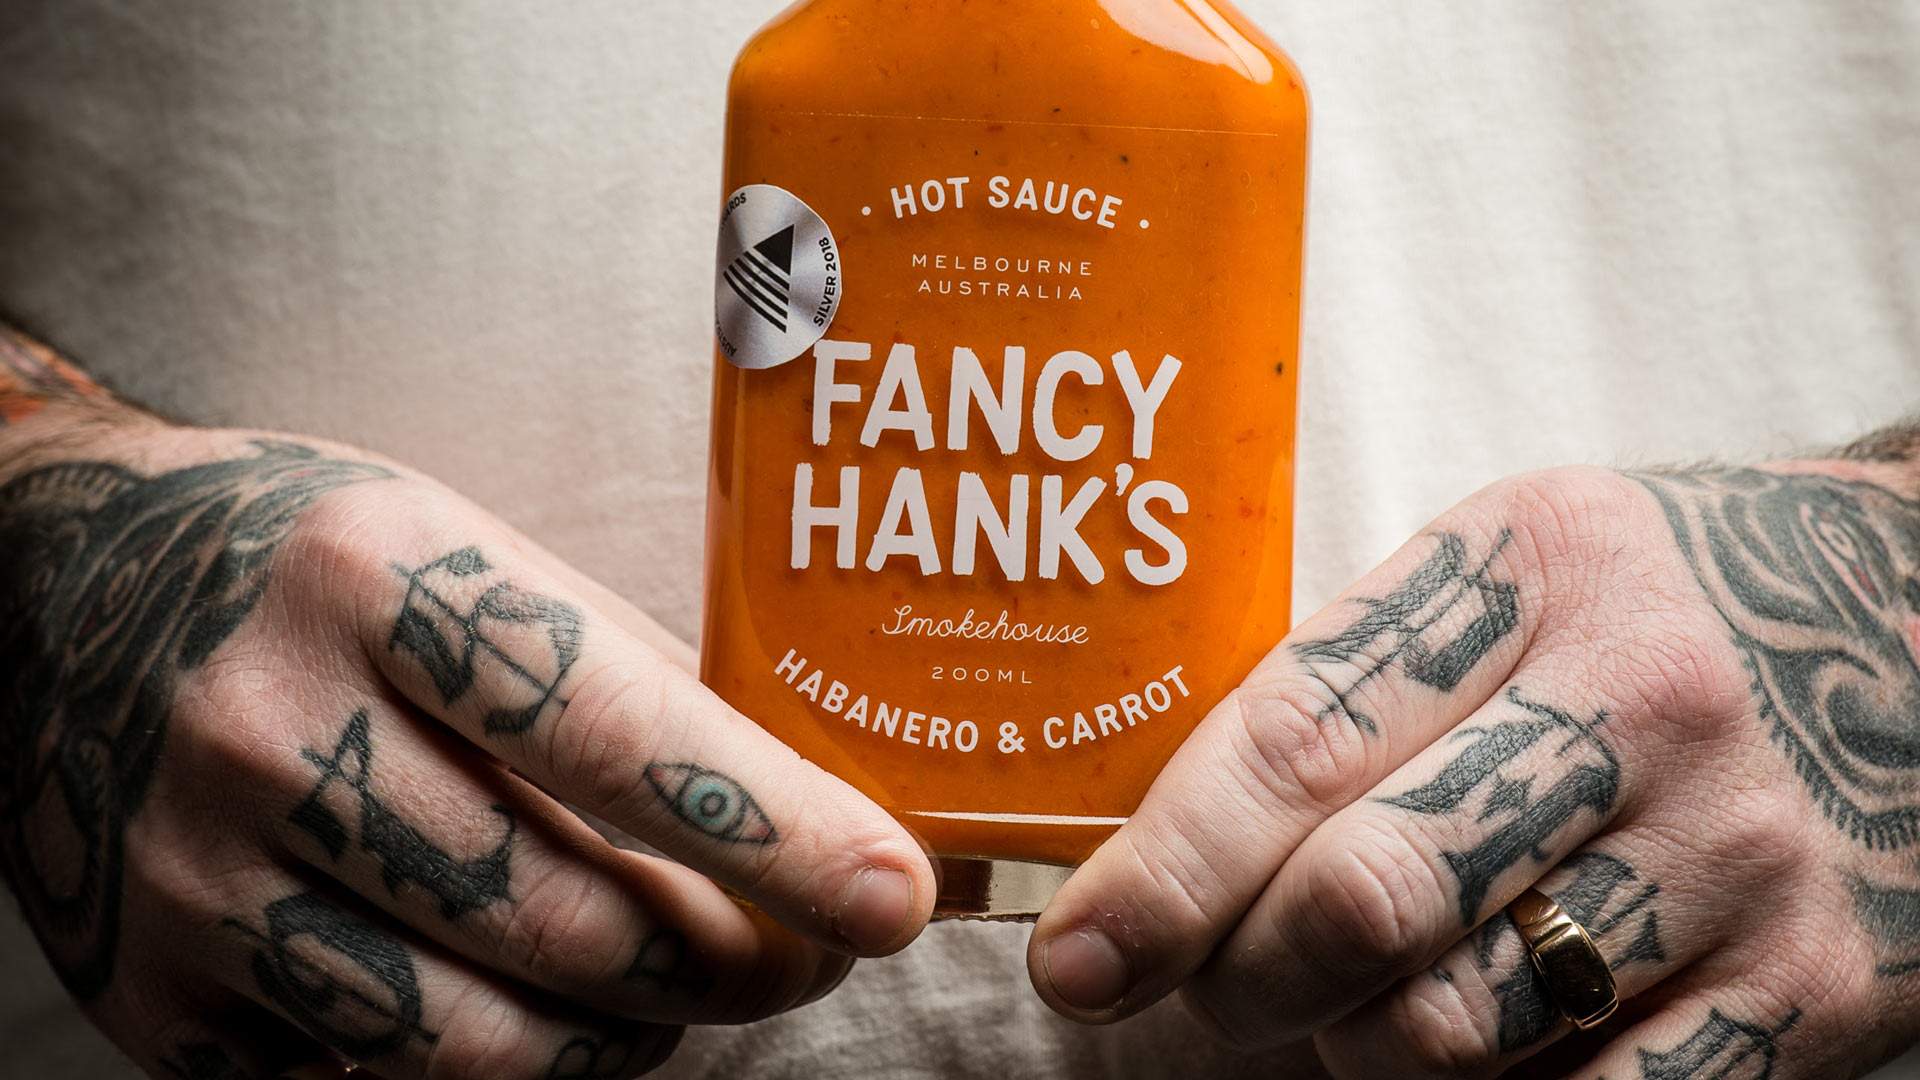 Barbecue Legend Fancy Hank's Has Just Dropped a Line of Take-Home Hot Sauces